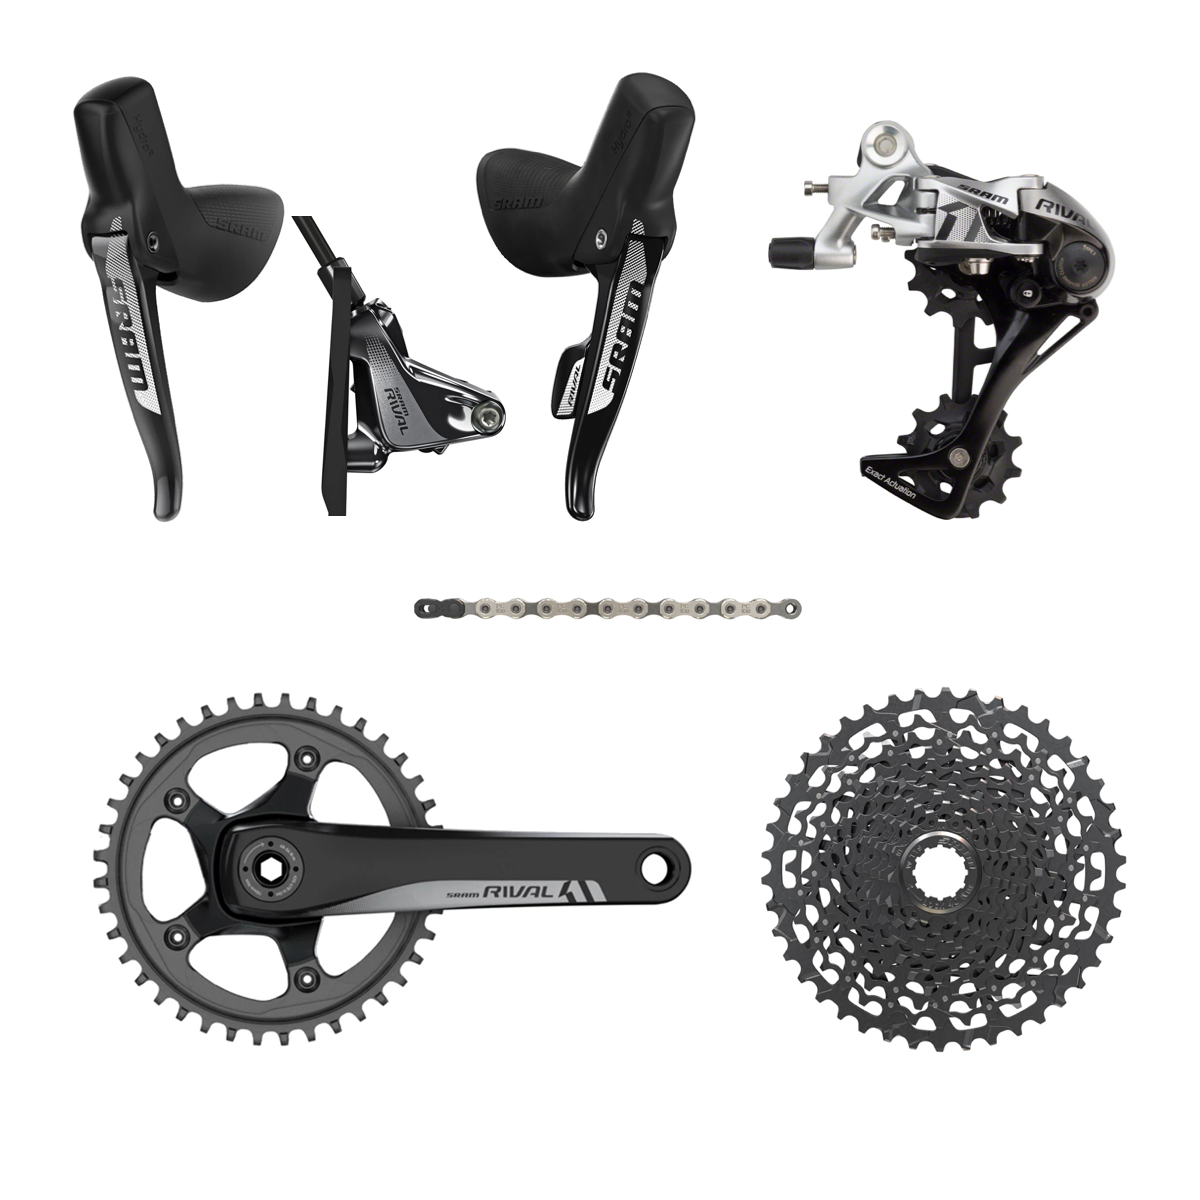 NEW SRAM Rival HRD 1x11 Speed Groupset, 172.5mm, 42t, 11-42t, GXP